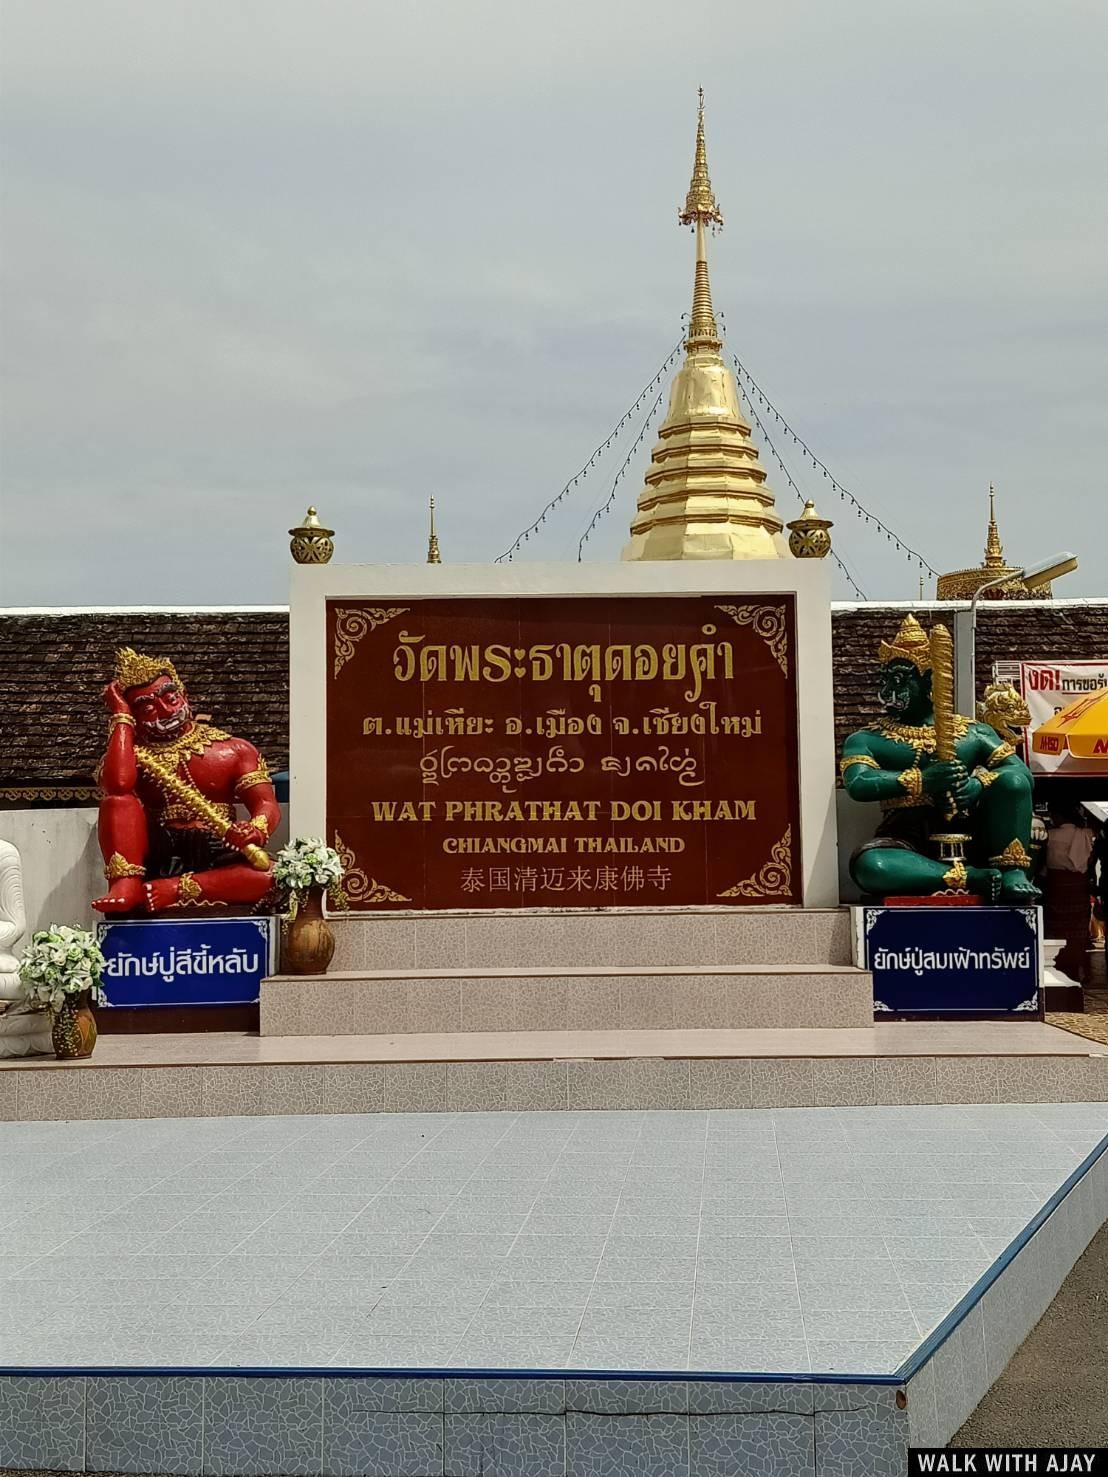 Driving Motorbike From Mae Klang Luang to Chiangmai : Thailand (Apr’21) – Day 6 23